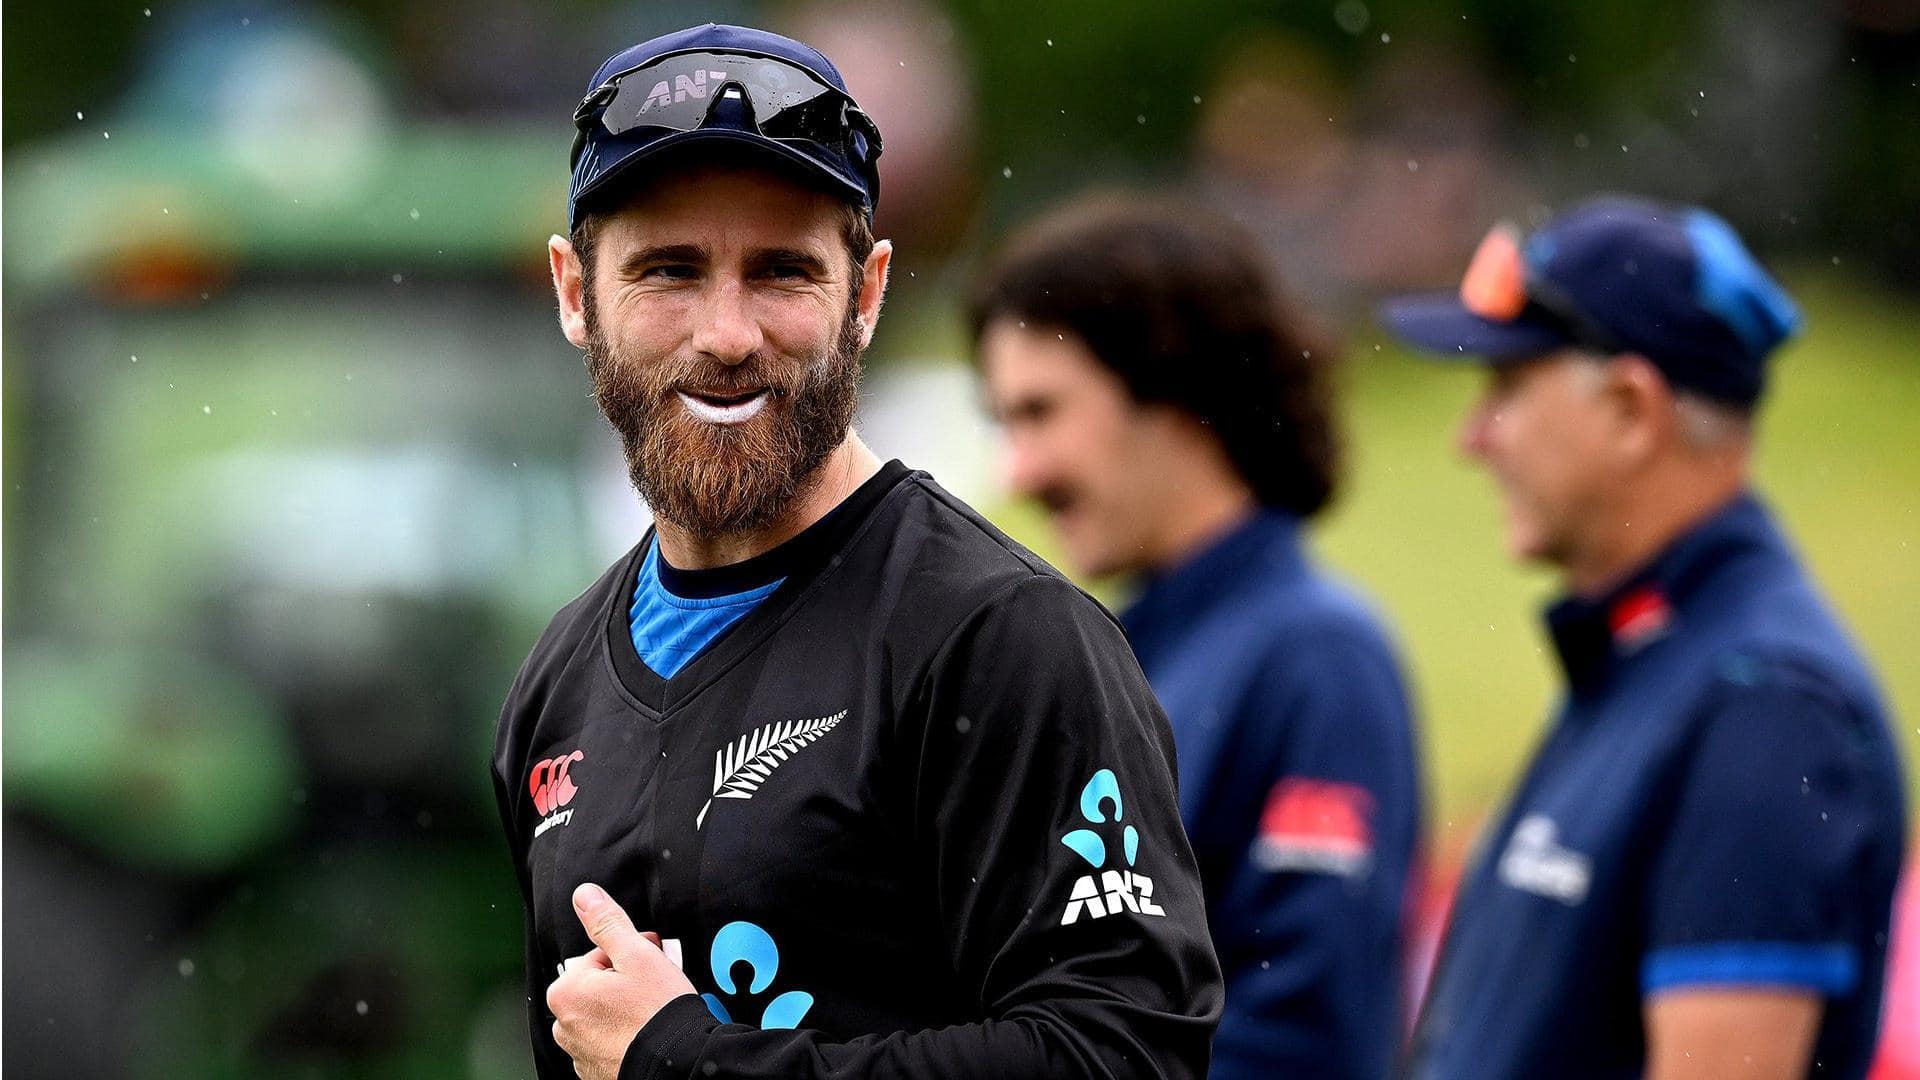 Kane Williamson likely to miss remainder of Pakistan T20I series